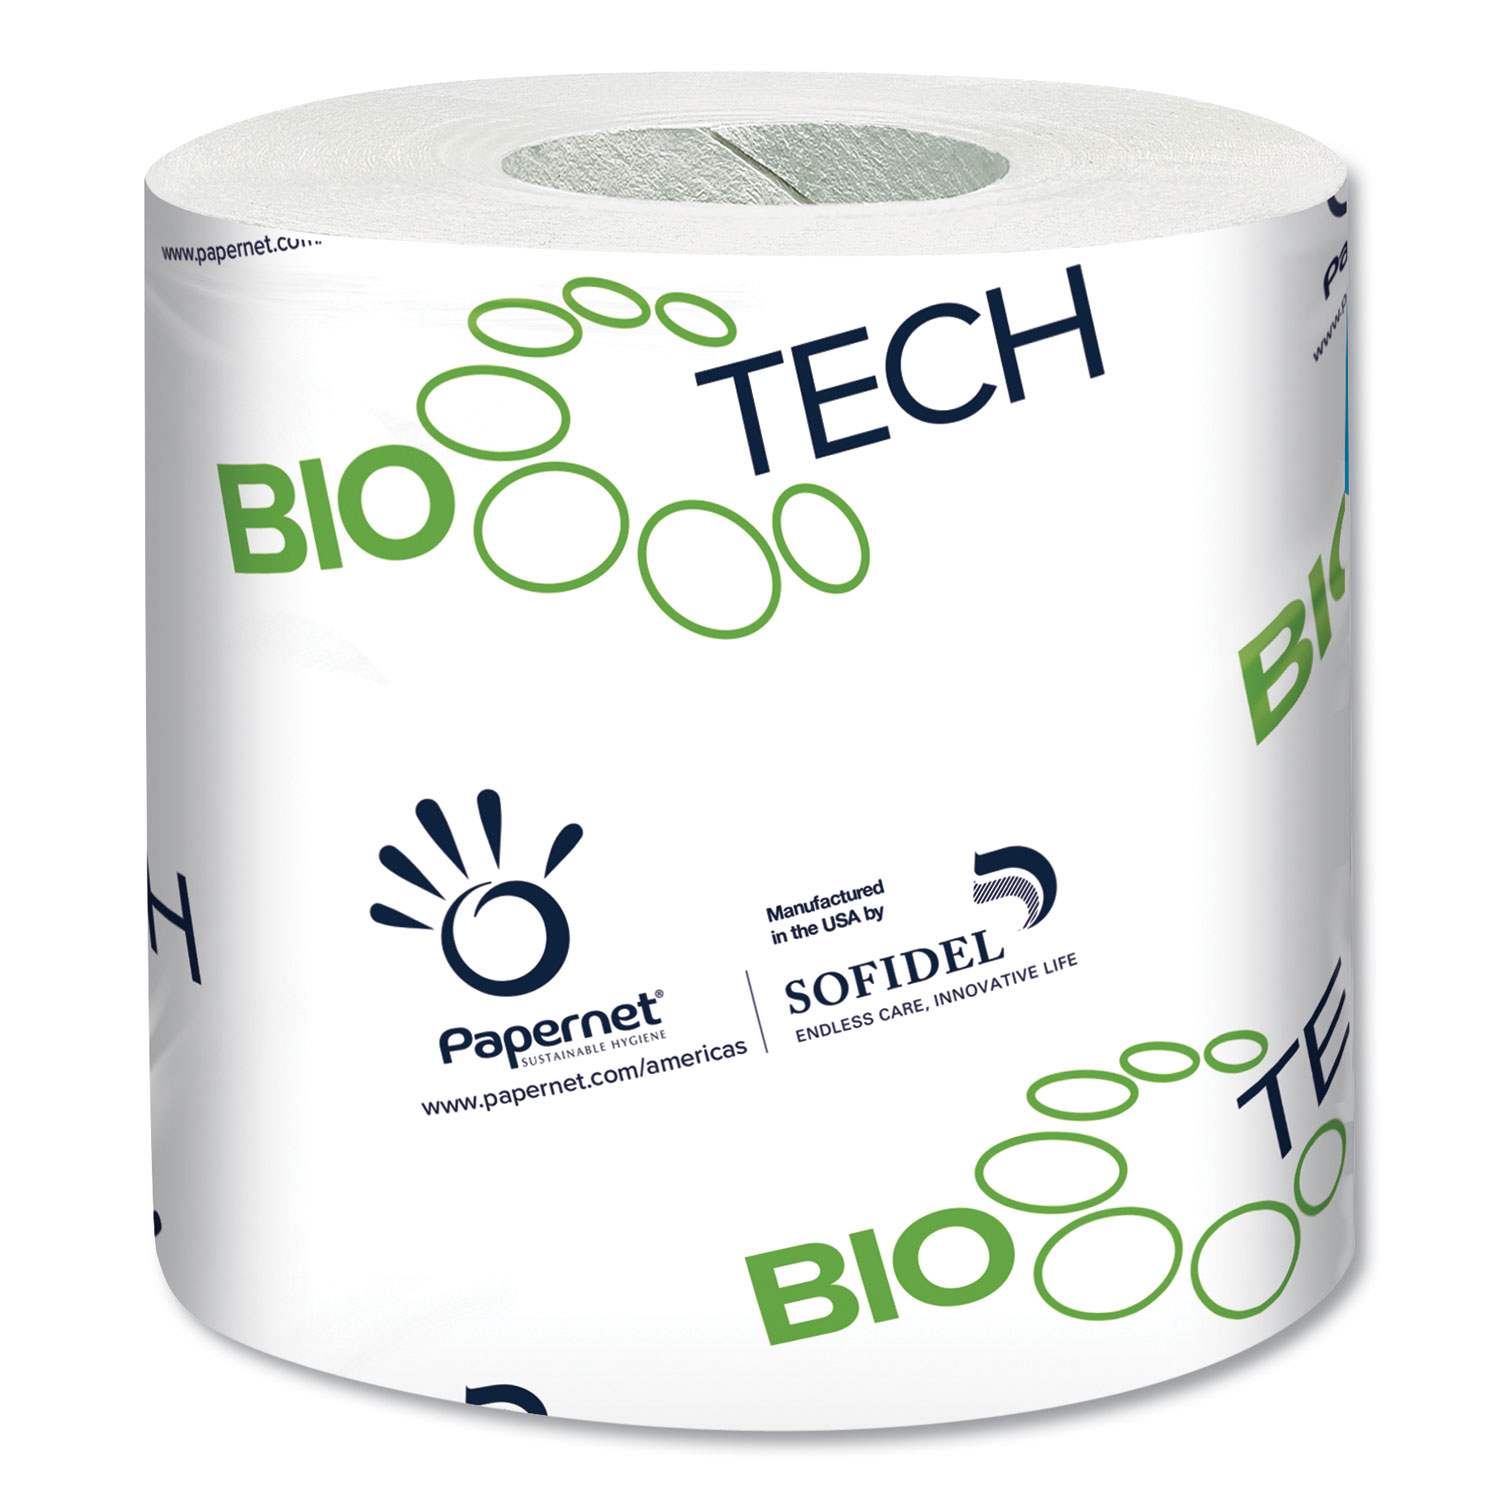  Papernet 415596 BioTech Toilet Tissue, Septic Safe, 2-Ply, White, 500 Sheets/Roll, 96 Rolls/Carton (SOD415596) 